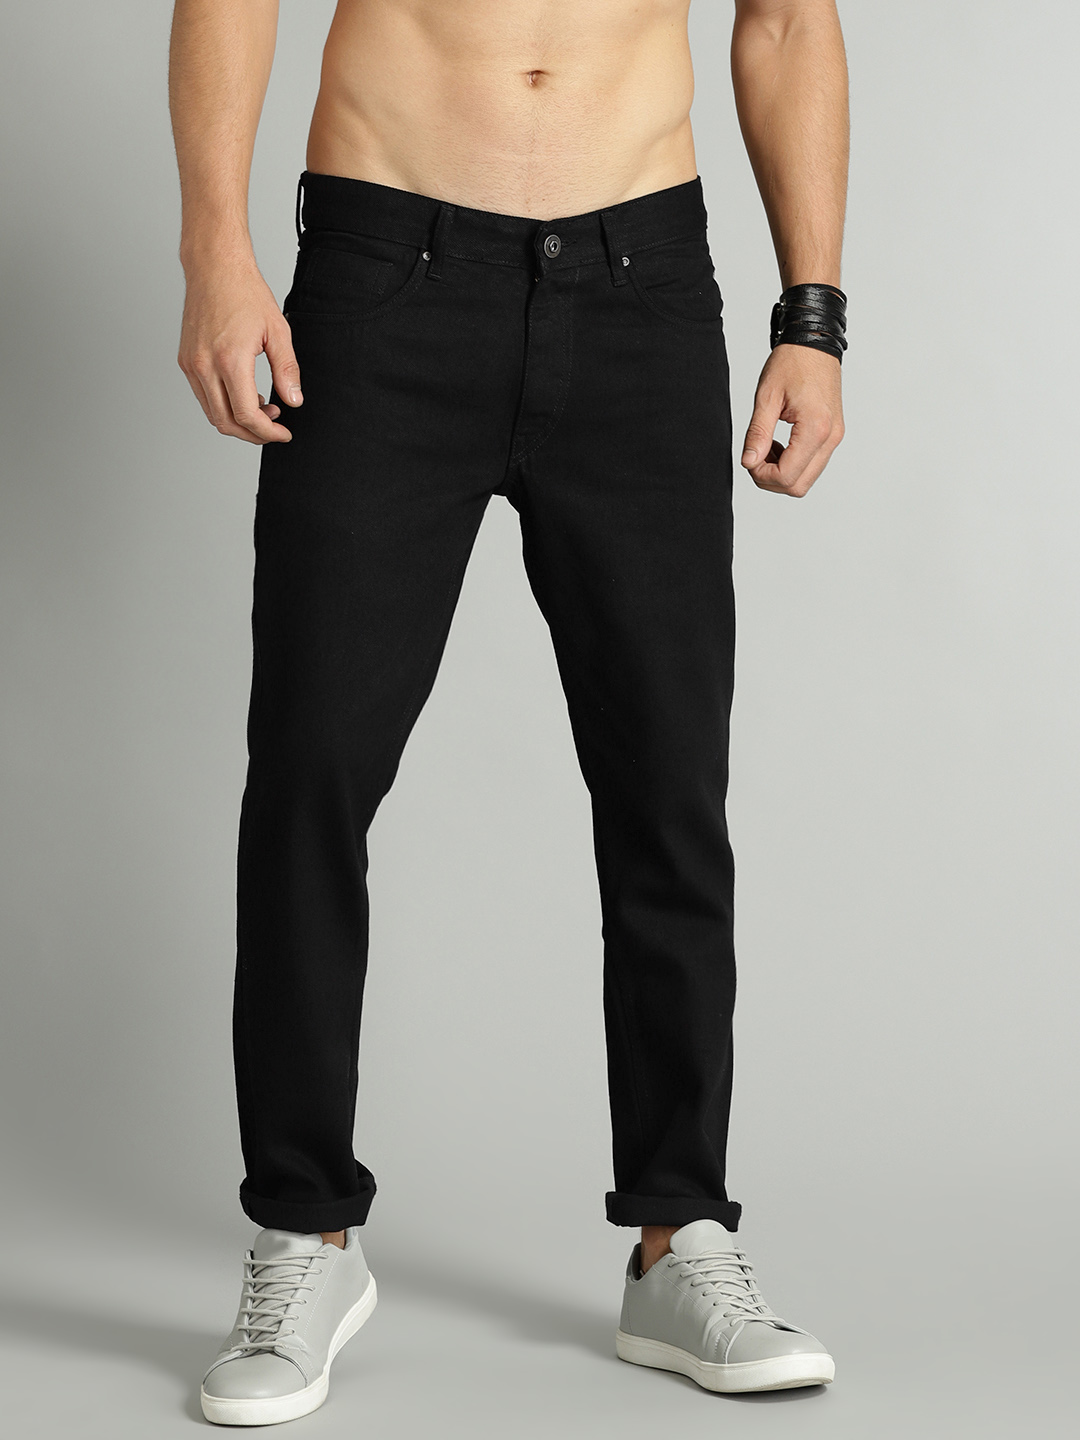 Roadster Jeans Powered Pepe - Buy Roadster Jeans Powered Pepe online in  India